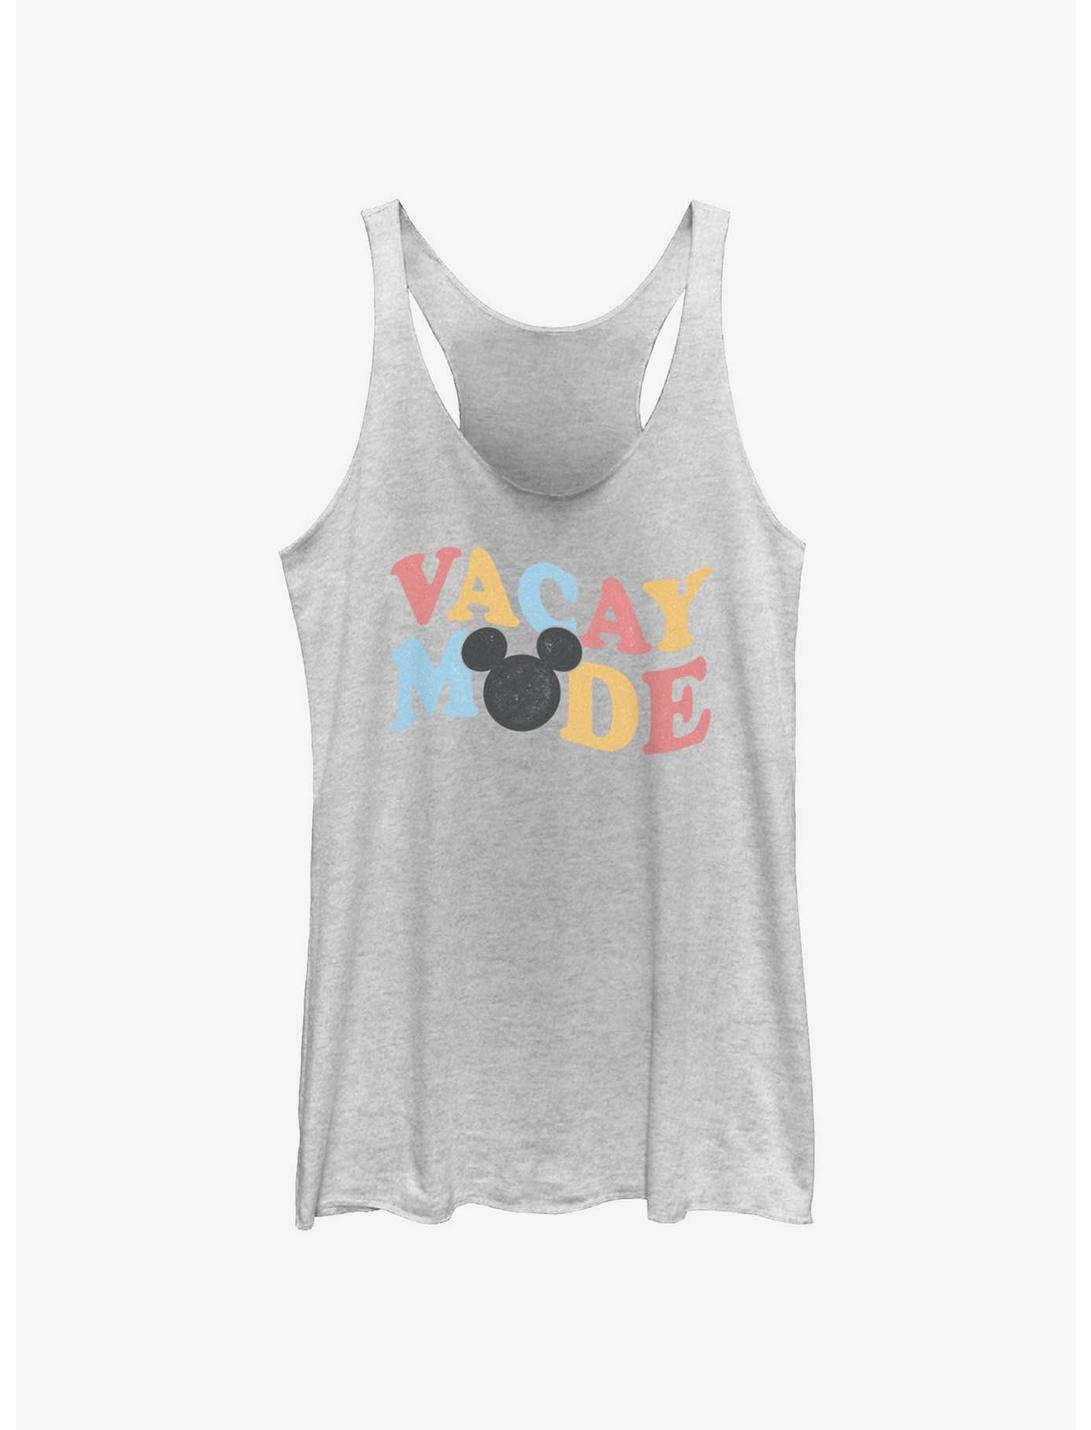 Disney Mickey Mouse Groovy Vacay Mode Womens Tank Top, WHITE HTR, hi-res